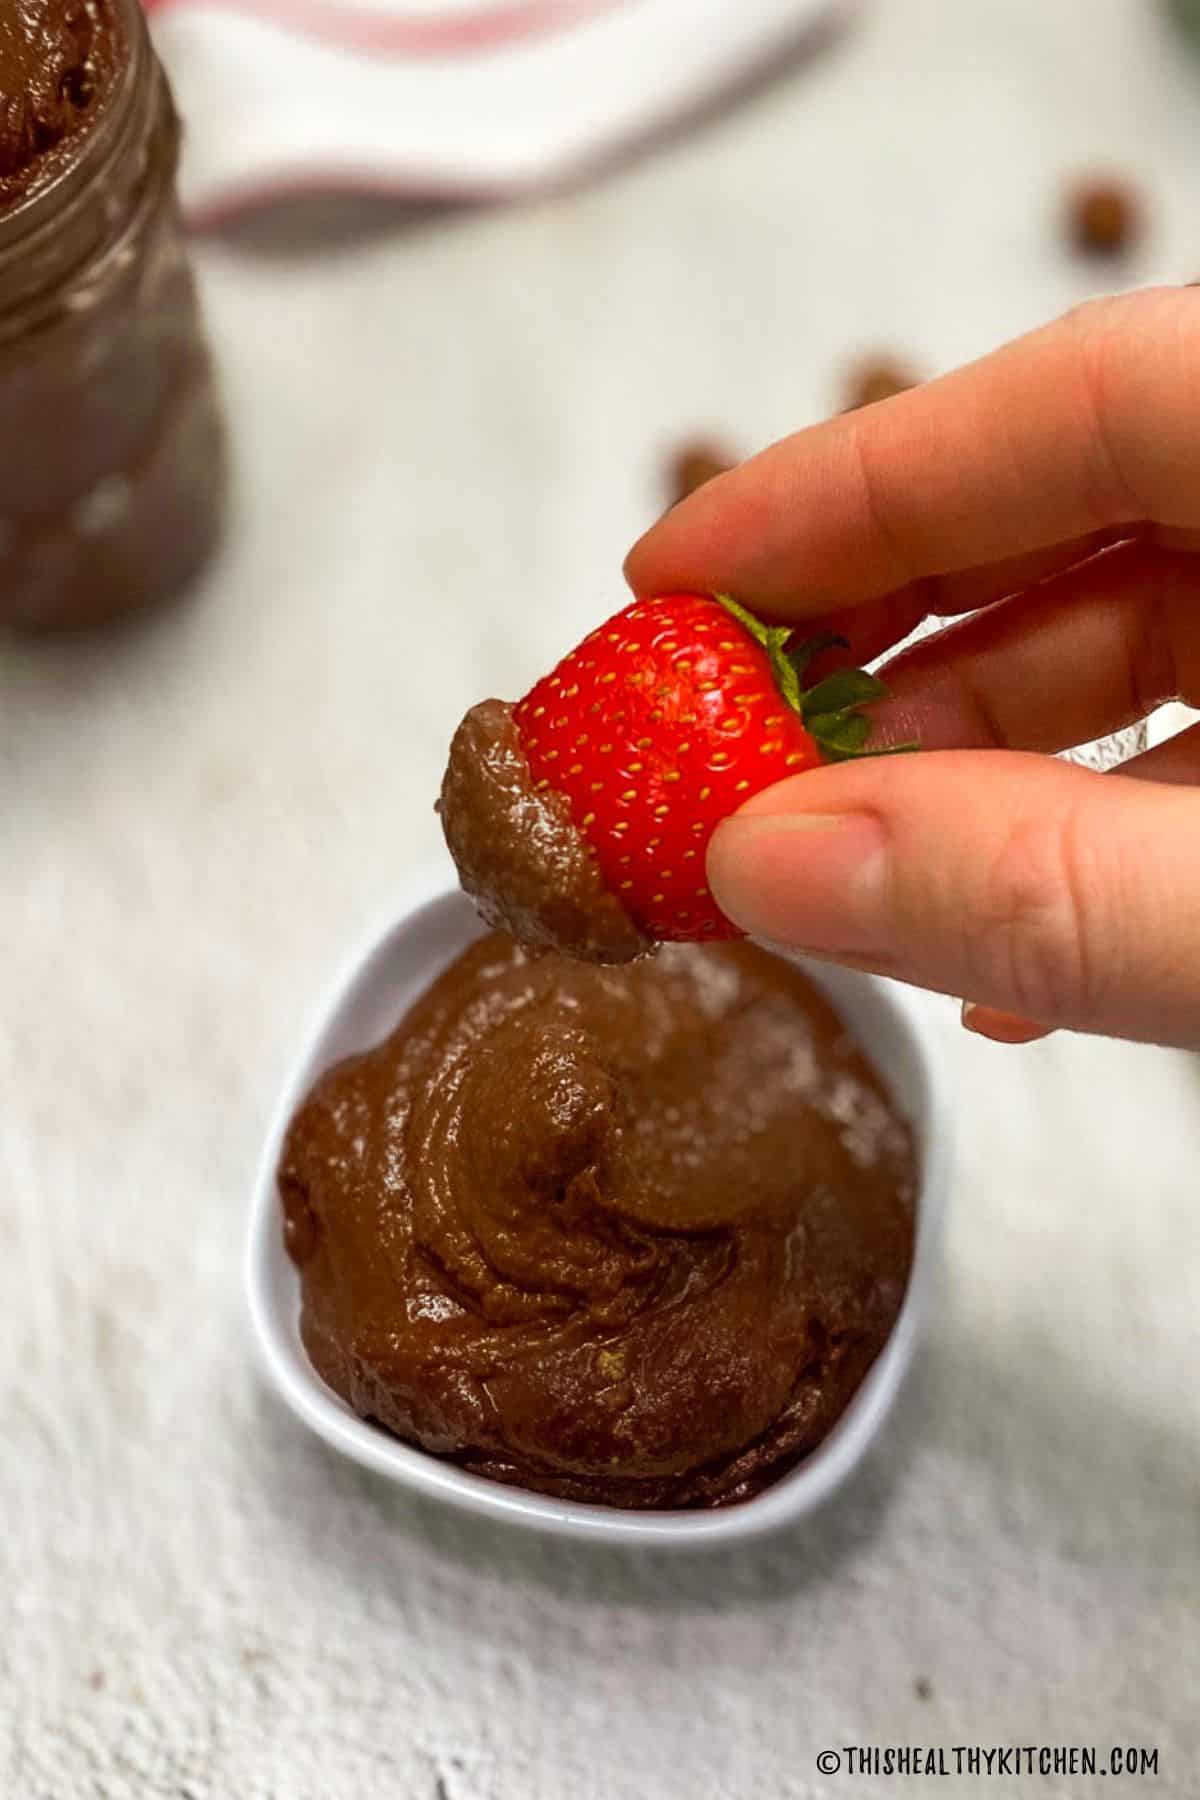 Strawberry dipped in chocolate spread being held up above bowl of Nutella.